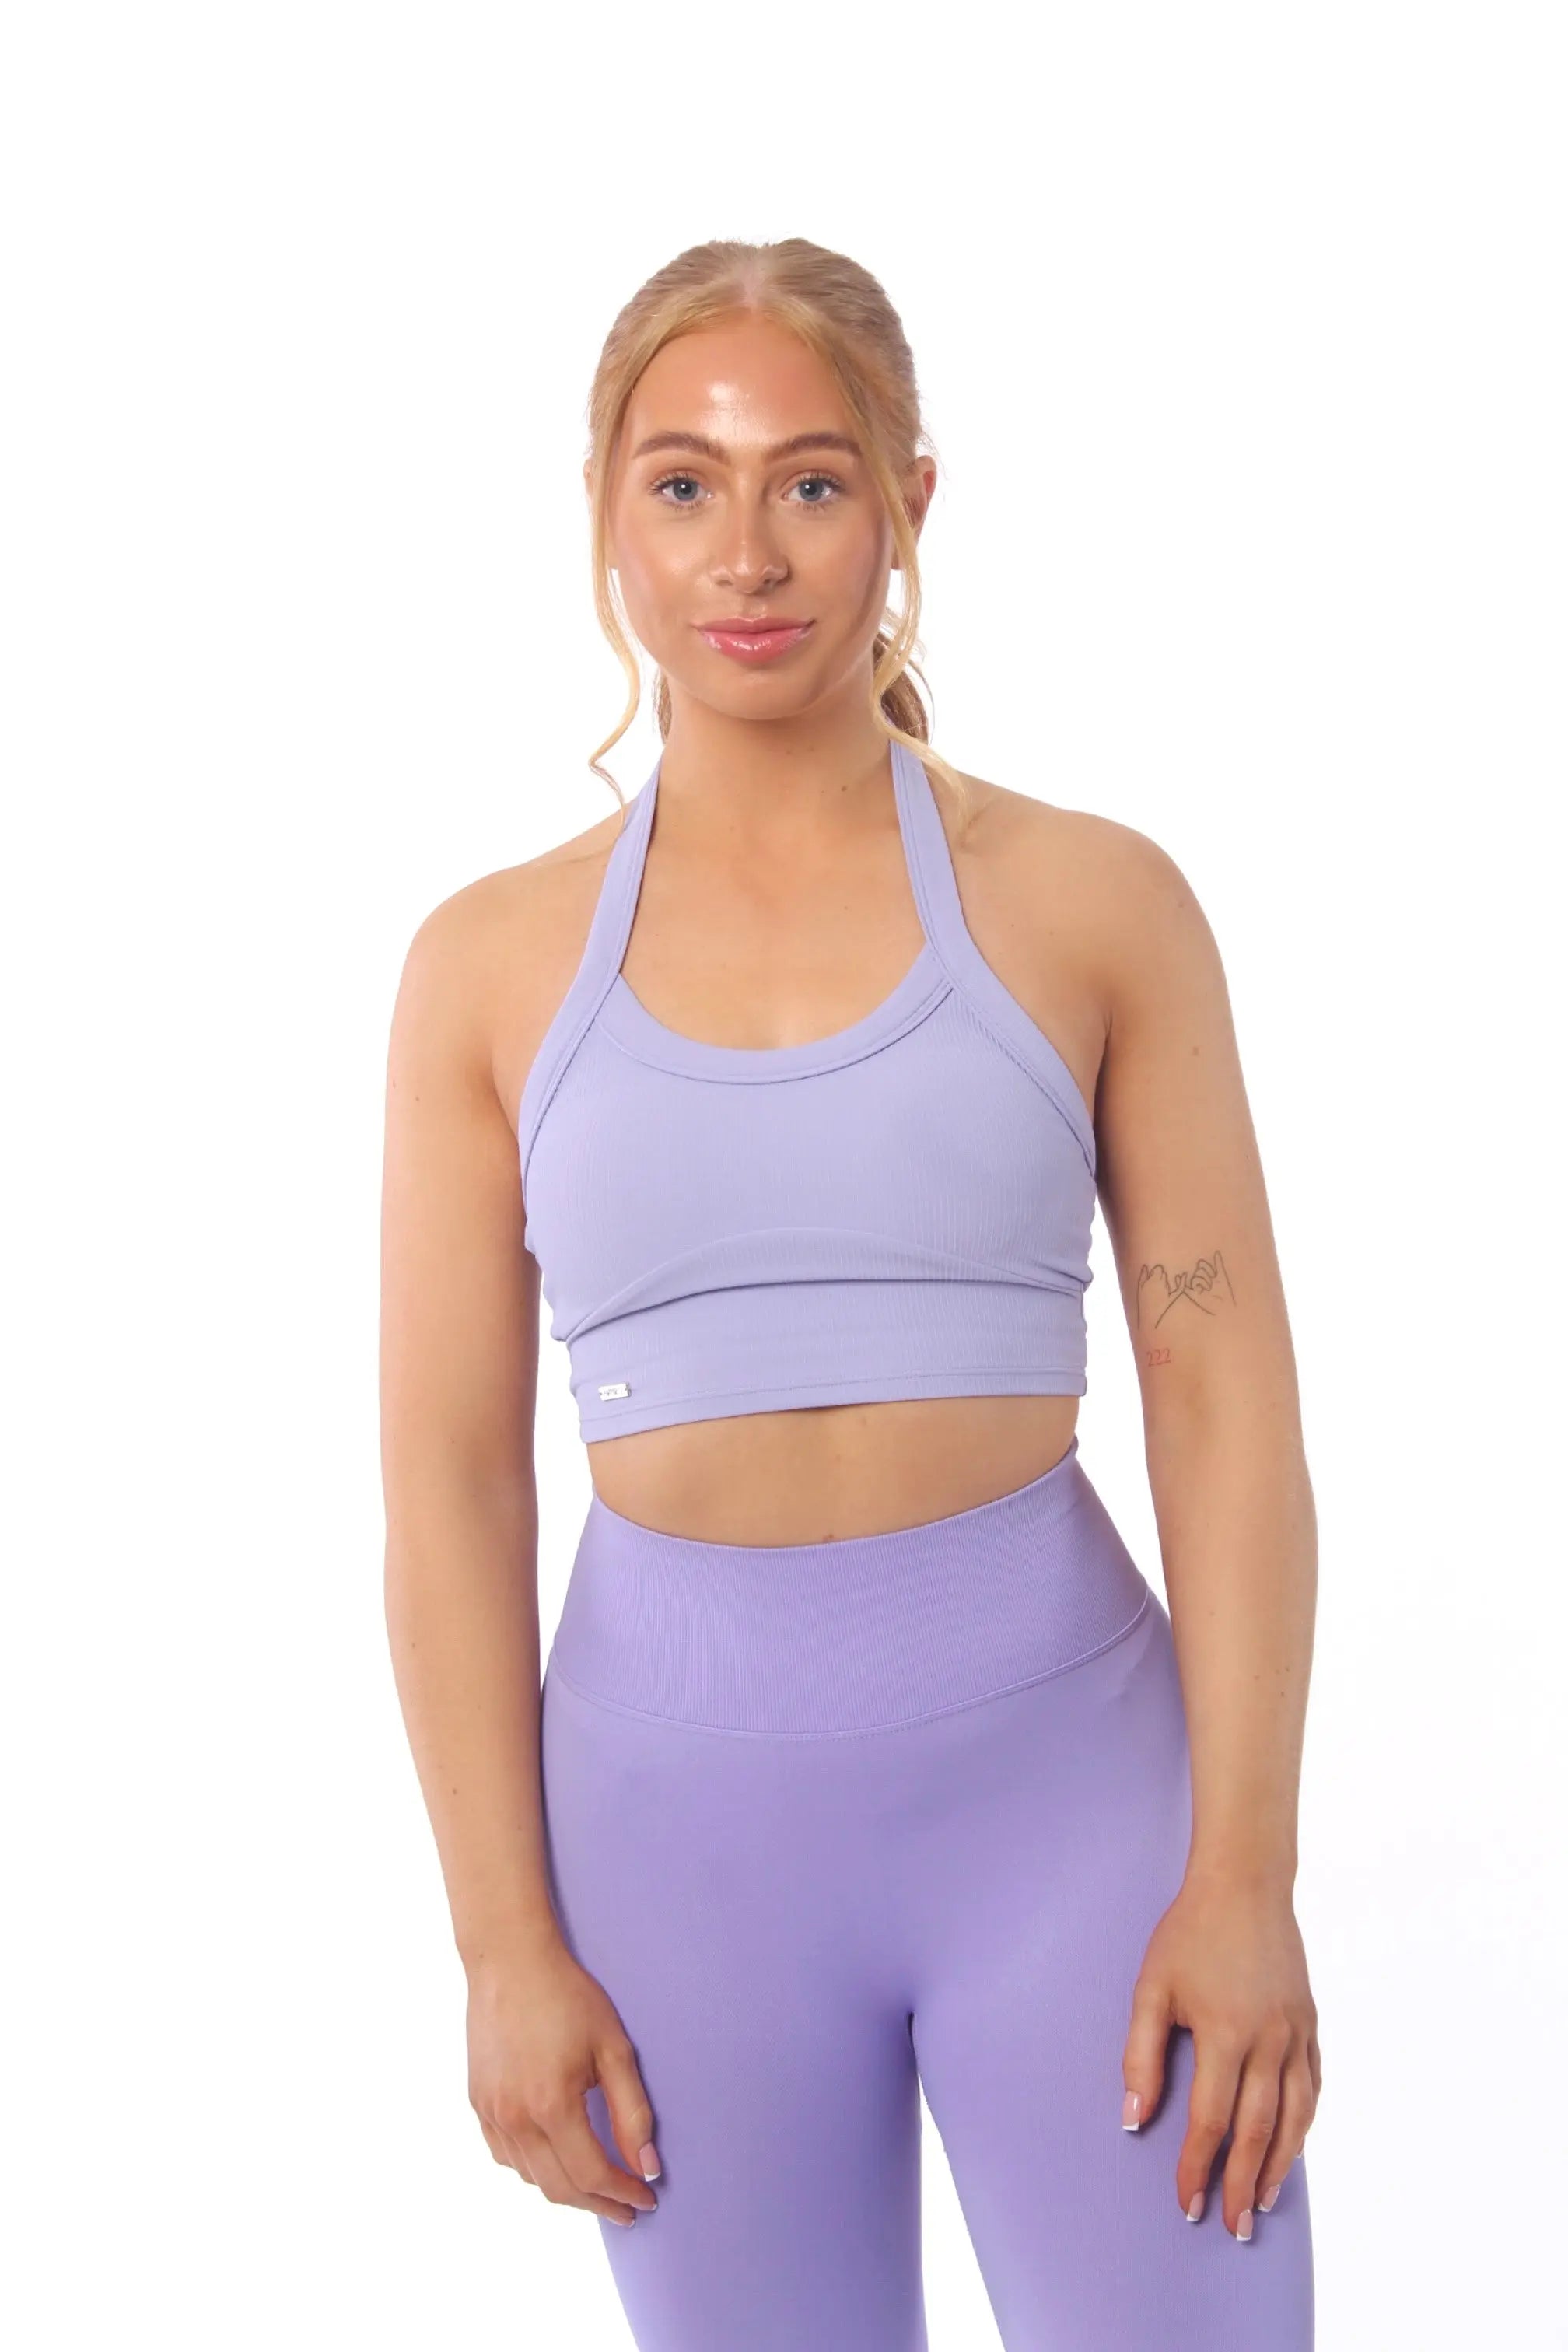 Signature Collection - Halter Neck Sports Bra in Lilac with built in support